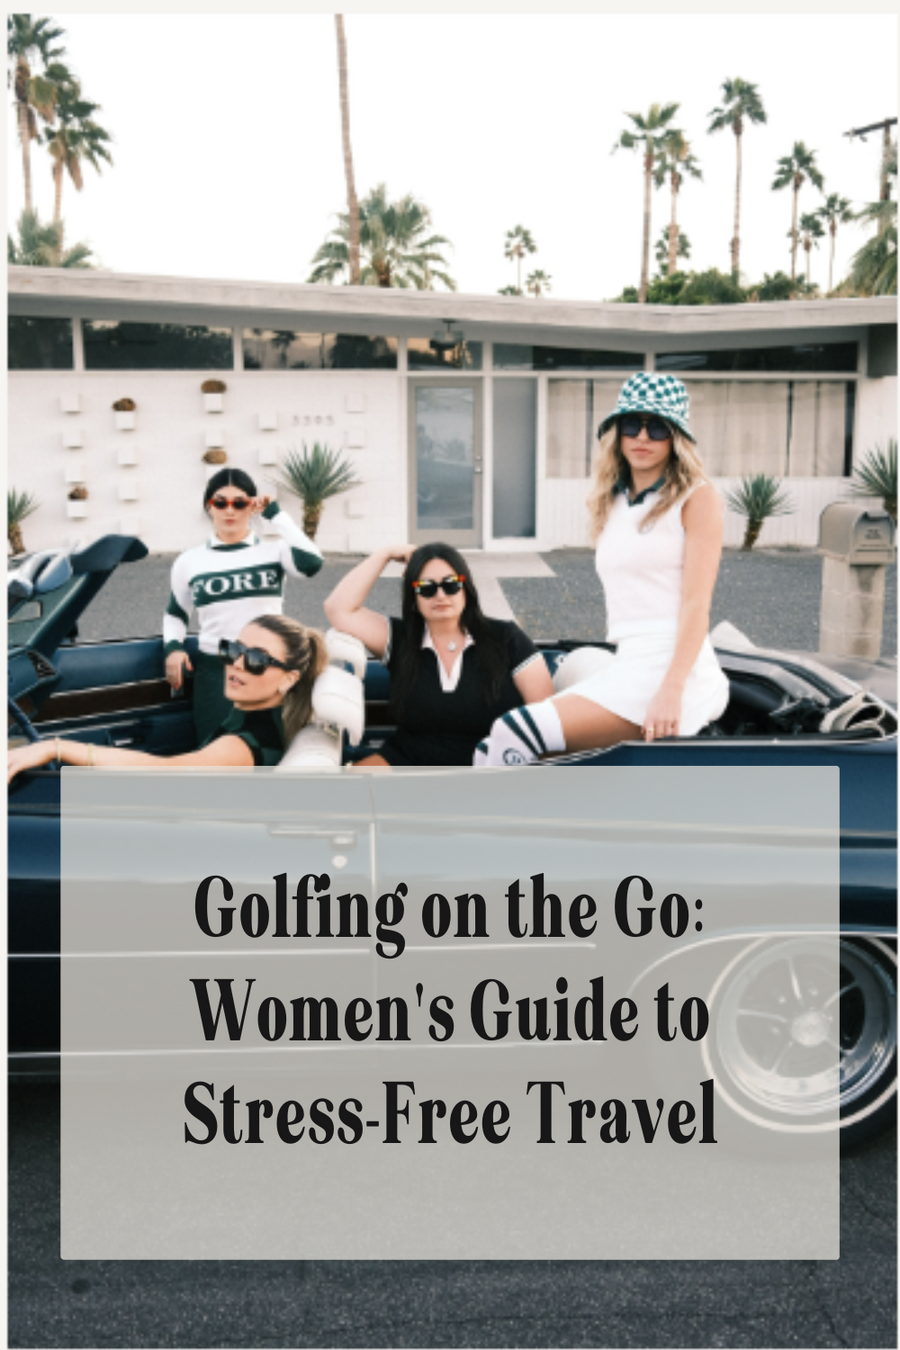 Golfing on the Go: Women's Guide to Stress-Free Travel